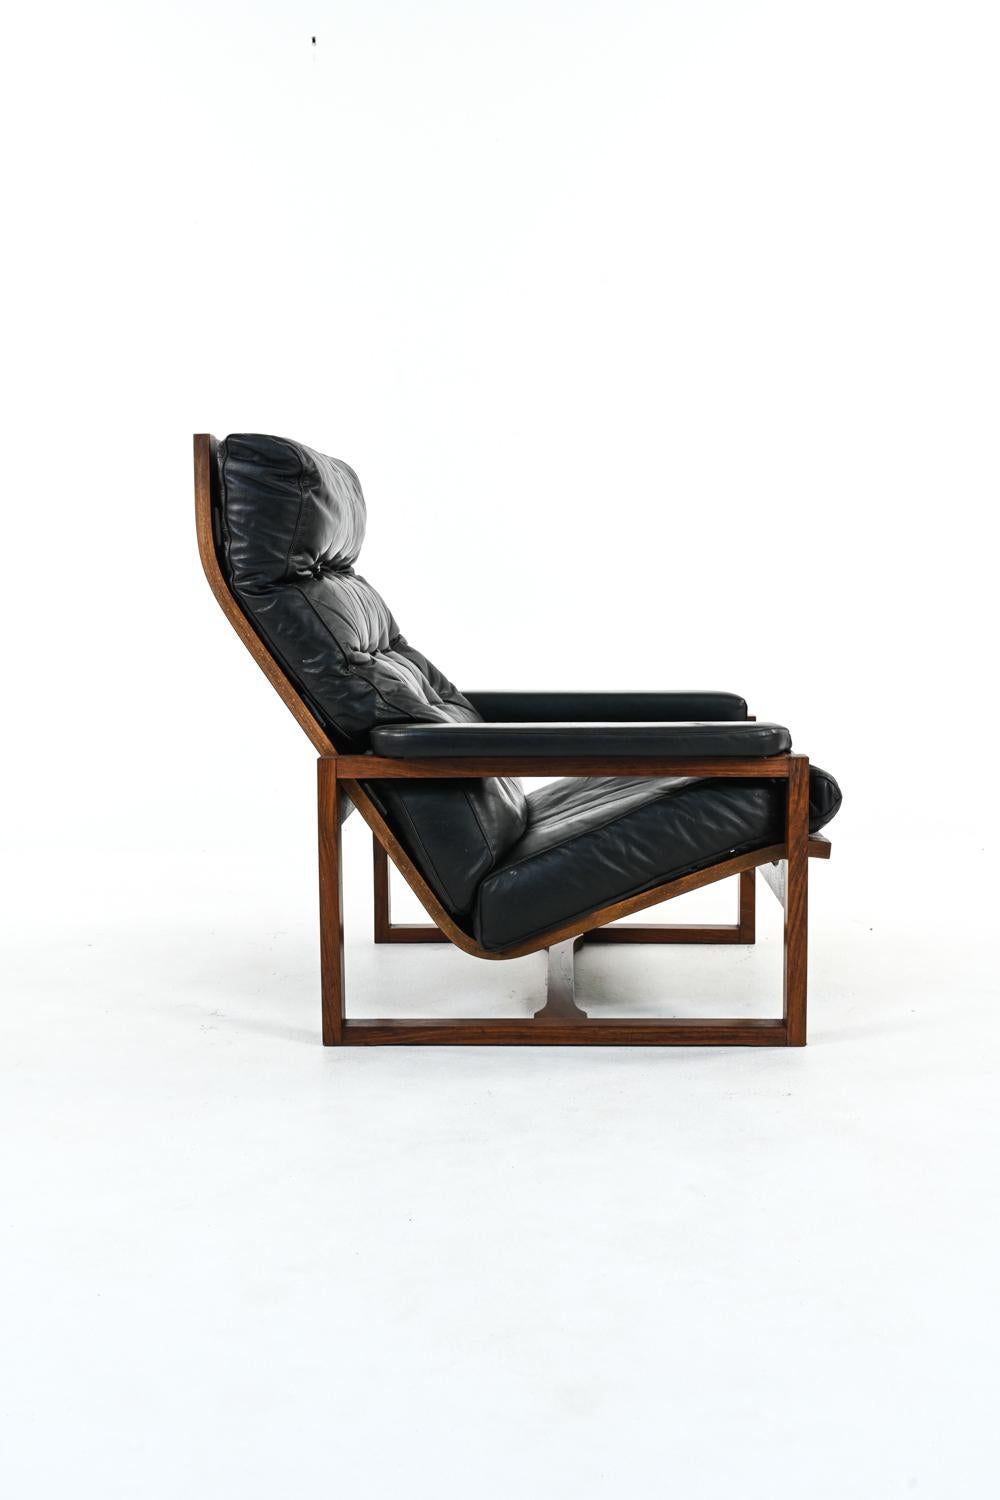 20th Century Danish Rosewood & Leather Lounge Chair in the Manner of Percival Lafer, c. 1980 For Sale